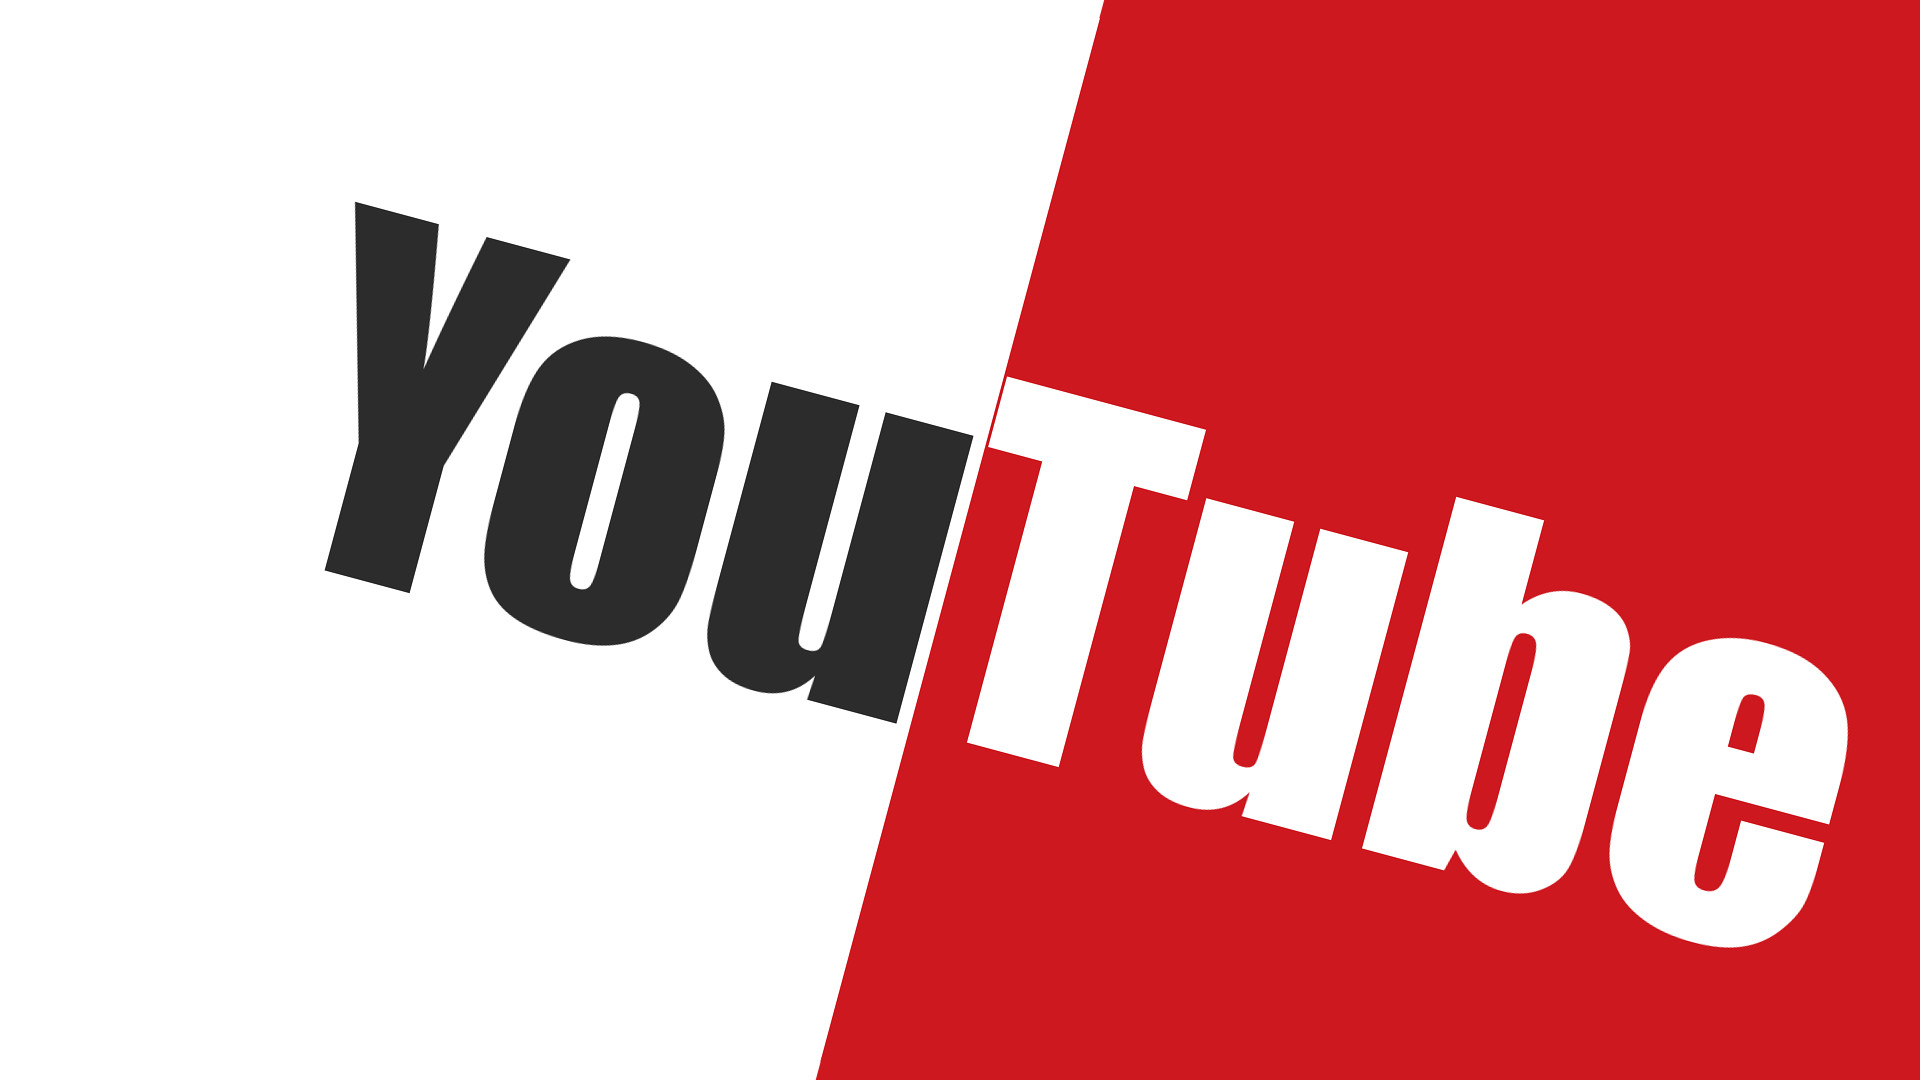 Youtube Logo Wallpapers Hd Wallpapers Backgrounds Images Art 1920x1080